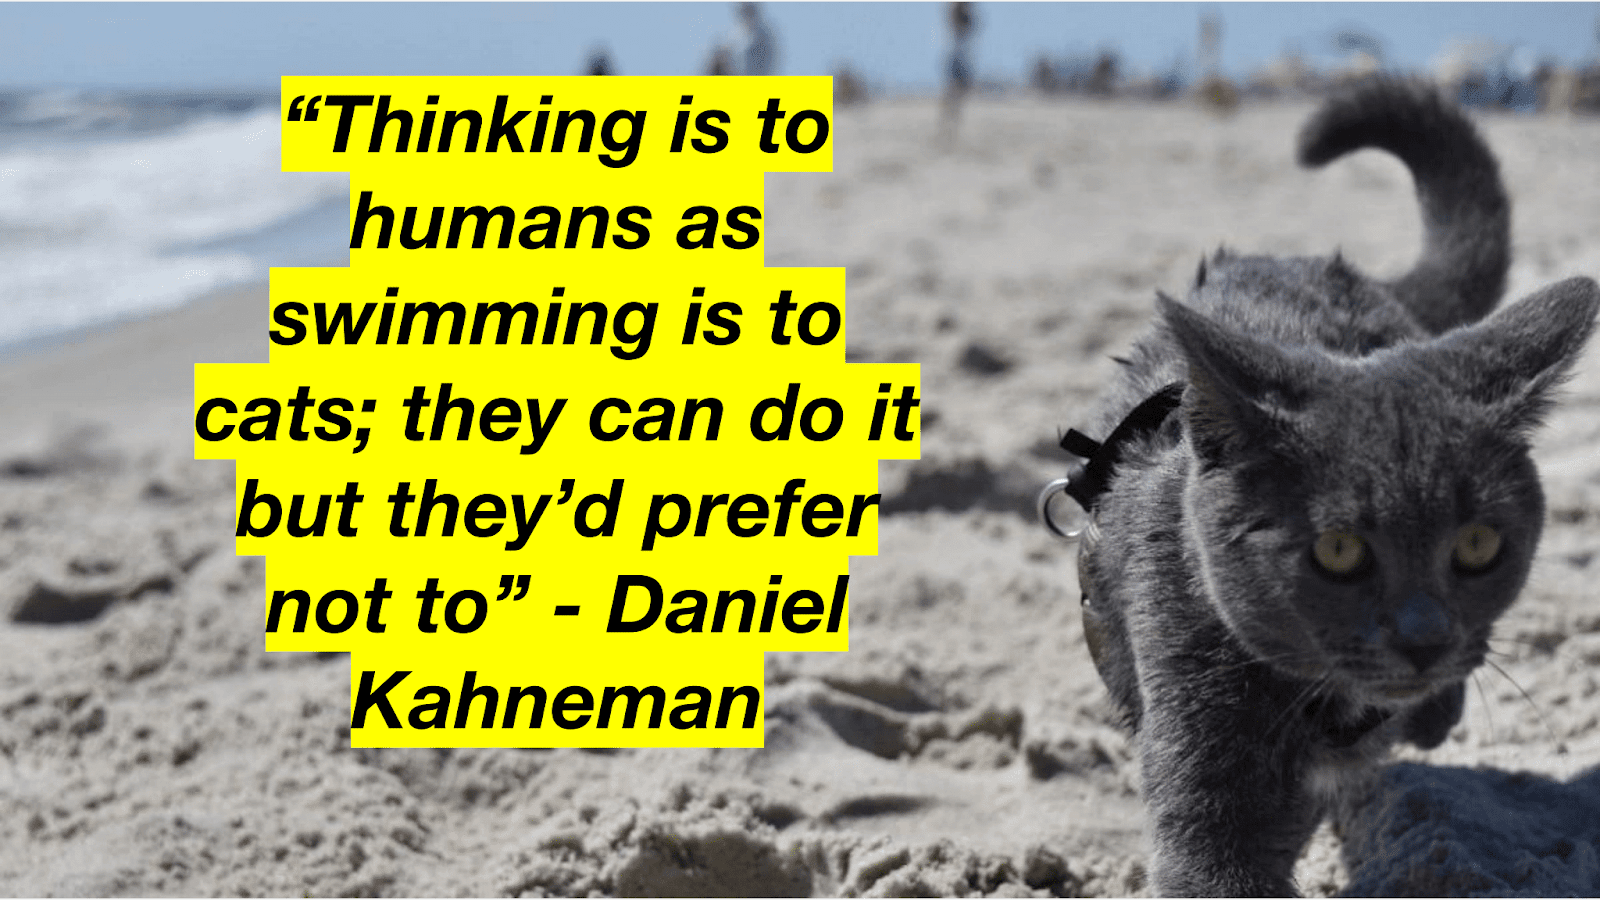 Photo of a cat on the beach with the quote: “Thinking is to humans as swimming is to cats; they can do it, but they'd rather not.“